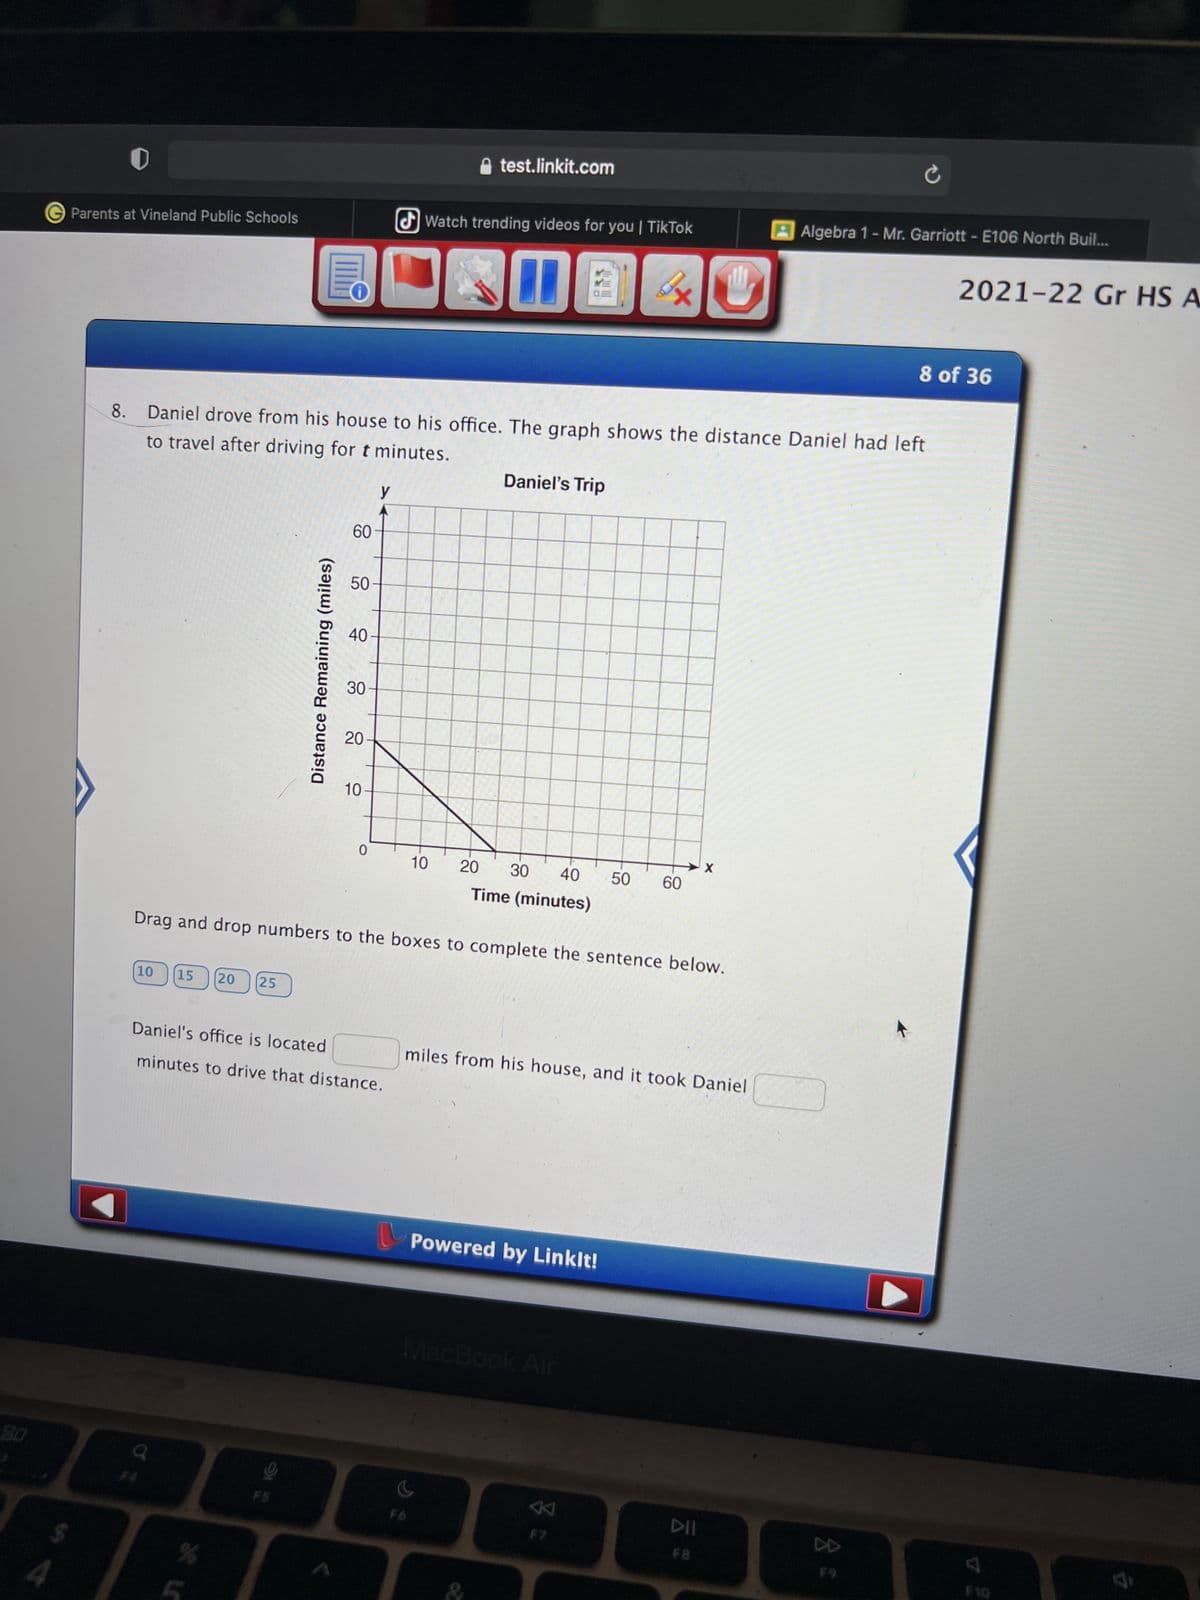 8.0
4
test.linkit.com
Watch trending videos for you | TikTok
Parents at Vineland Public Schools
D
0 B
3x
8 of 36
8. Daniel drove from his house to his office. The graph shows the distance Daniel had left
to travel after driving for t minutes.
Daniel's Trip
y
40
30
20
10-
0
10
20 30 40 50 60
Time (minutes)
Drag and drop numbers to the boxes to complete the sentence below.
10
15 20 25
Daniel's office is located
miles from his house, and it took Daniel
minutes to drive that distance.
Powered by Linklt!
MacBook Air
a
F6
%
F5
Distance Remaining (miles)
60
50
F7
DII
F8
X
AAlgebra 1 - Mr. Garriott - E106 North Buil...
8 %
2021-22 Gr HS A
F10